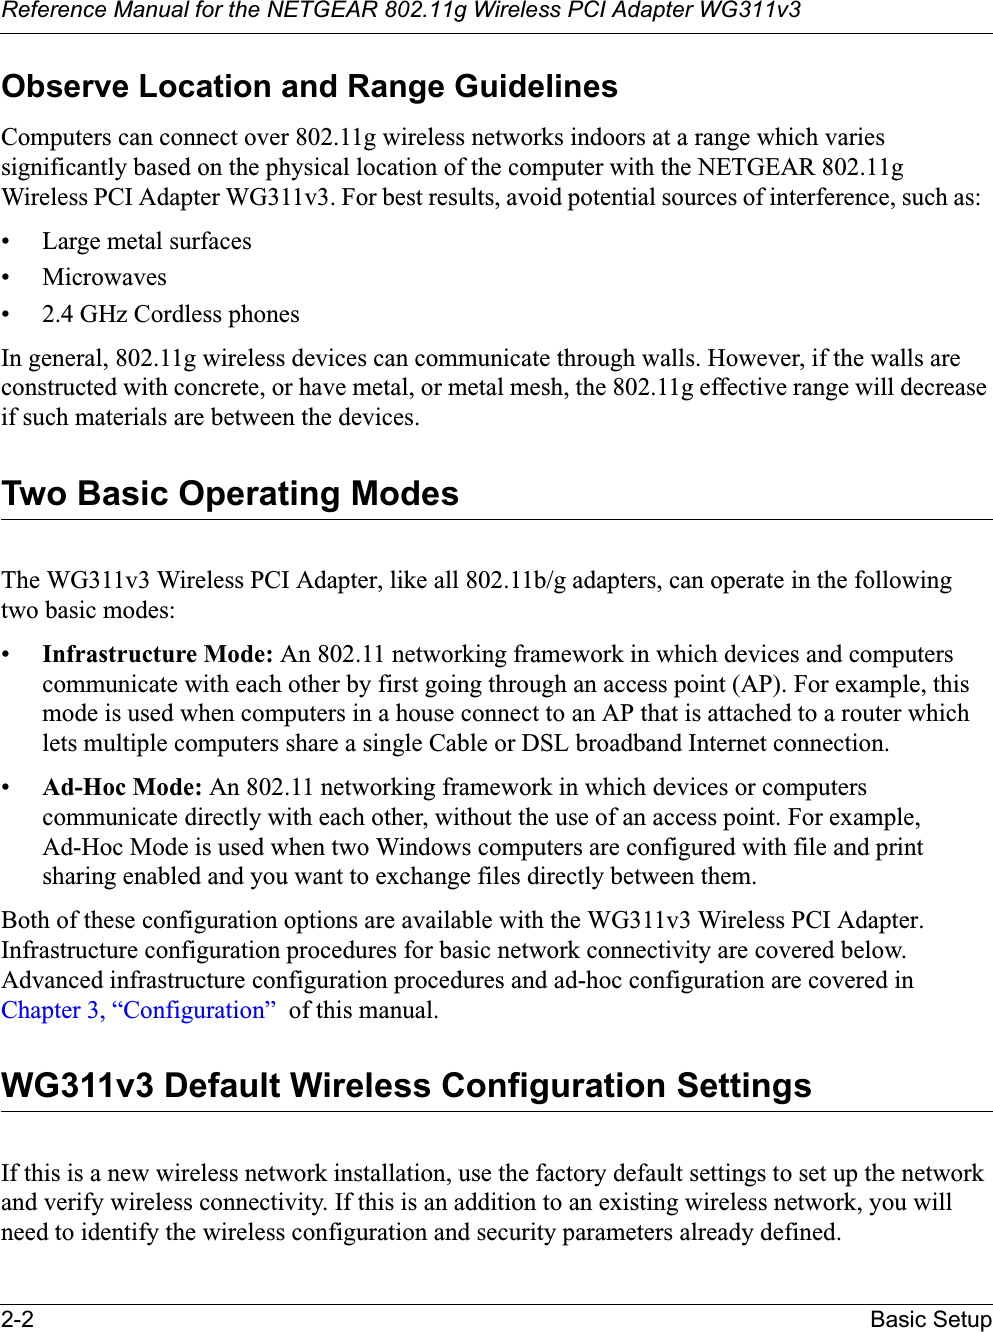 Reference Manual for the NETGEAR 802.11g Wireless PCI Adapter WG311v32-2 Basic SetupObserve Location and Range GuidelinesComputers can connect over 802.11g wireless networks indoors at a range which varies significantly based on the physical location of the computer with the NETGEAR 802.11gWireless PCI Adapter WG311v3. For best results, avoid potential sources of interference, such as: • Large metal surfaces• Microwaves• 2.4 GHz Cordless phonesIn general, 802.11g wireless devices can communicate through walls. However, if the walls are constructed with concrete, or have metal, or metal mesh, the 802.11g effective range will decrease if such materials are between the devices.Two Basic Operating ModesThe WG311v3 Wireless PCI Adapter, like all 802.11b/g adapters, can operate in the following two basic modes:•Infrastructure Mode: An 802.11 networking framework in which devices and computers communicate with each other by first going through an access point (AP). For example, this mode is used when computers in a house connect to an AP that is attached to a router which lets multiple computers share a single Cable or DSL broadband Internet connection.•Ad-Hoc Mode: An 802.11 networking framework in which devices or computers communicate directly with each other, without the use of an access point. For example, Ad-Hoc Mode is used when two Windows computers are configured with file and print sharing enabled and you want to exchange files directly between them.Both of these configuration options are available with the WG311v3 Wireless PCI Adapter. Infrastructure configuration procedures for basic network connectivity are covered below. Advanced infrastructure configuration procedures and ad-hoc configuration are covered in Chapter 3, “Configuration”  of this manual.WG311v3 Default Wireless Configuration SettingsIf this is a new wireless network installation, use the factory default settings to set up the network and verify wireless connectivity. If this is an addition to an existing wireless network, you will need to identify the wireless configuration and security parameters already defined. 